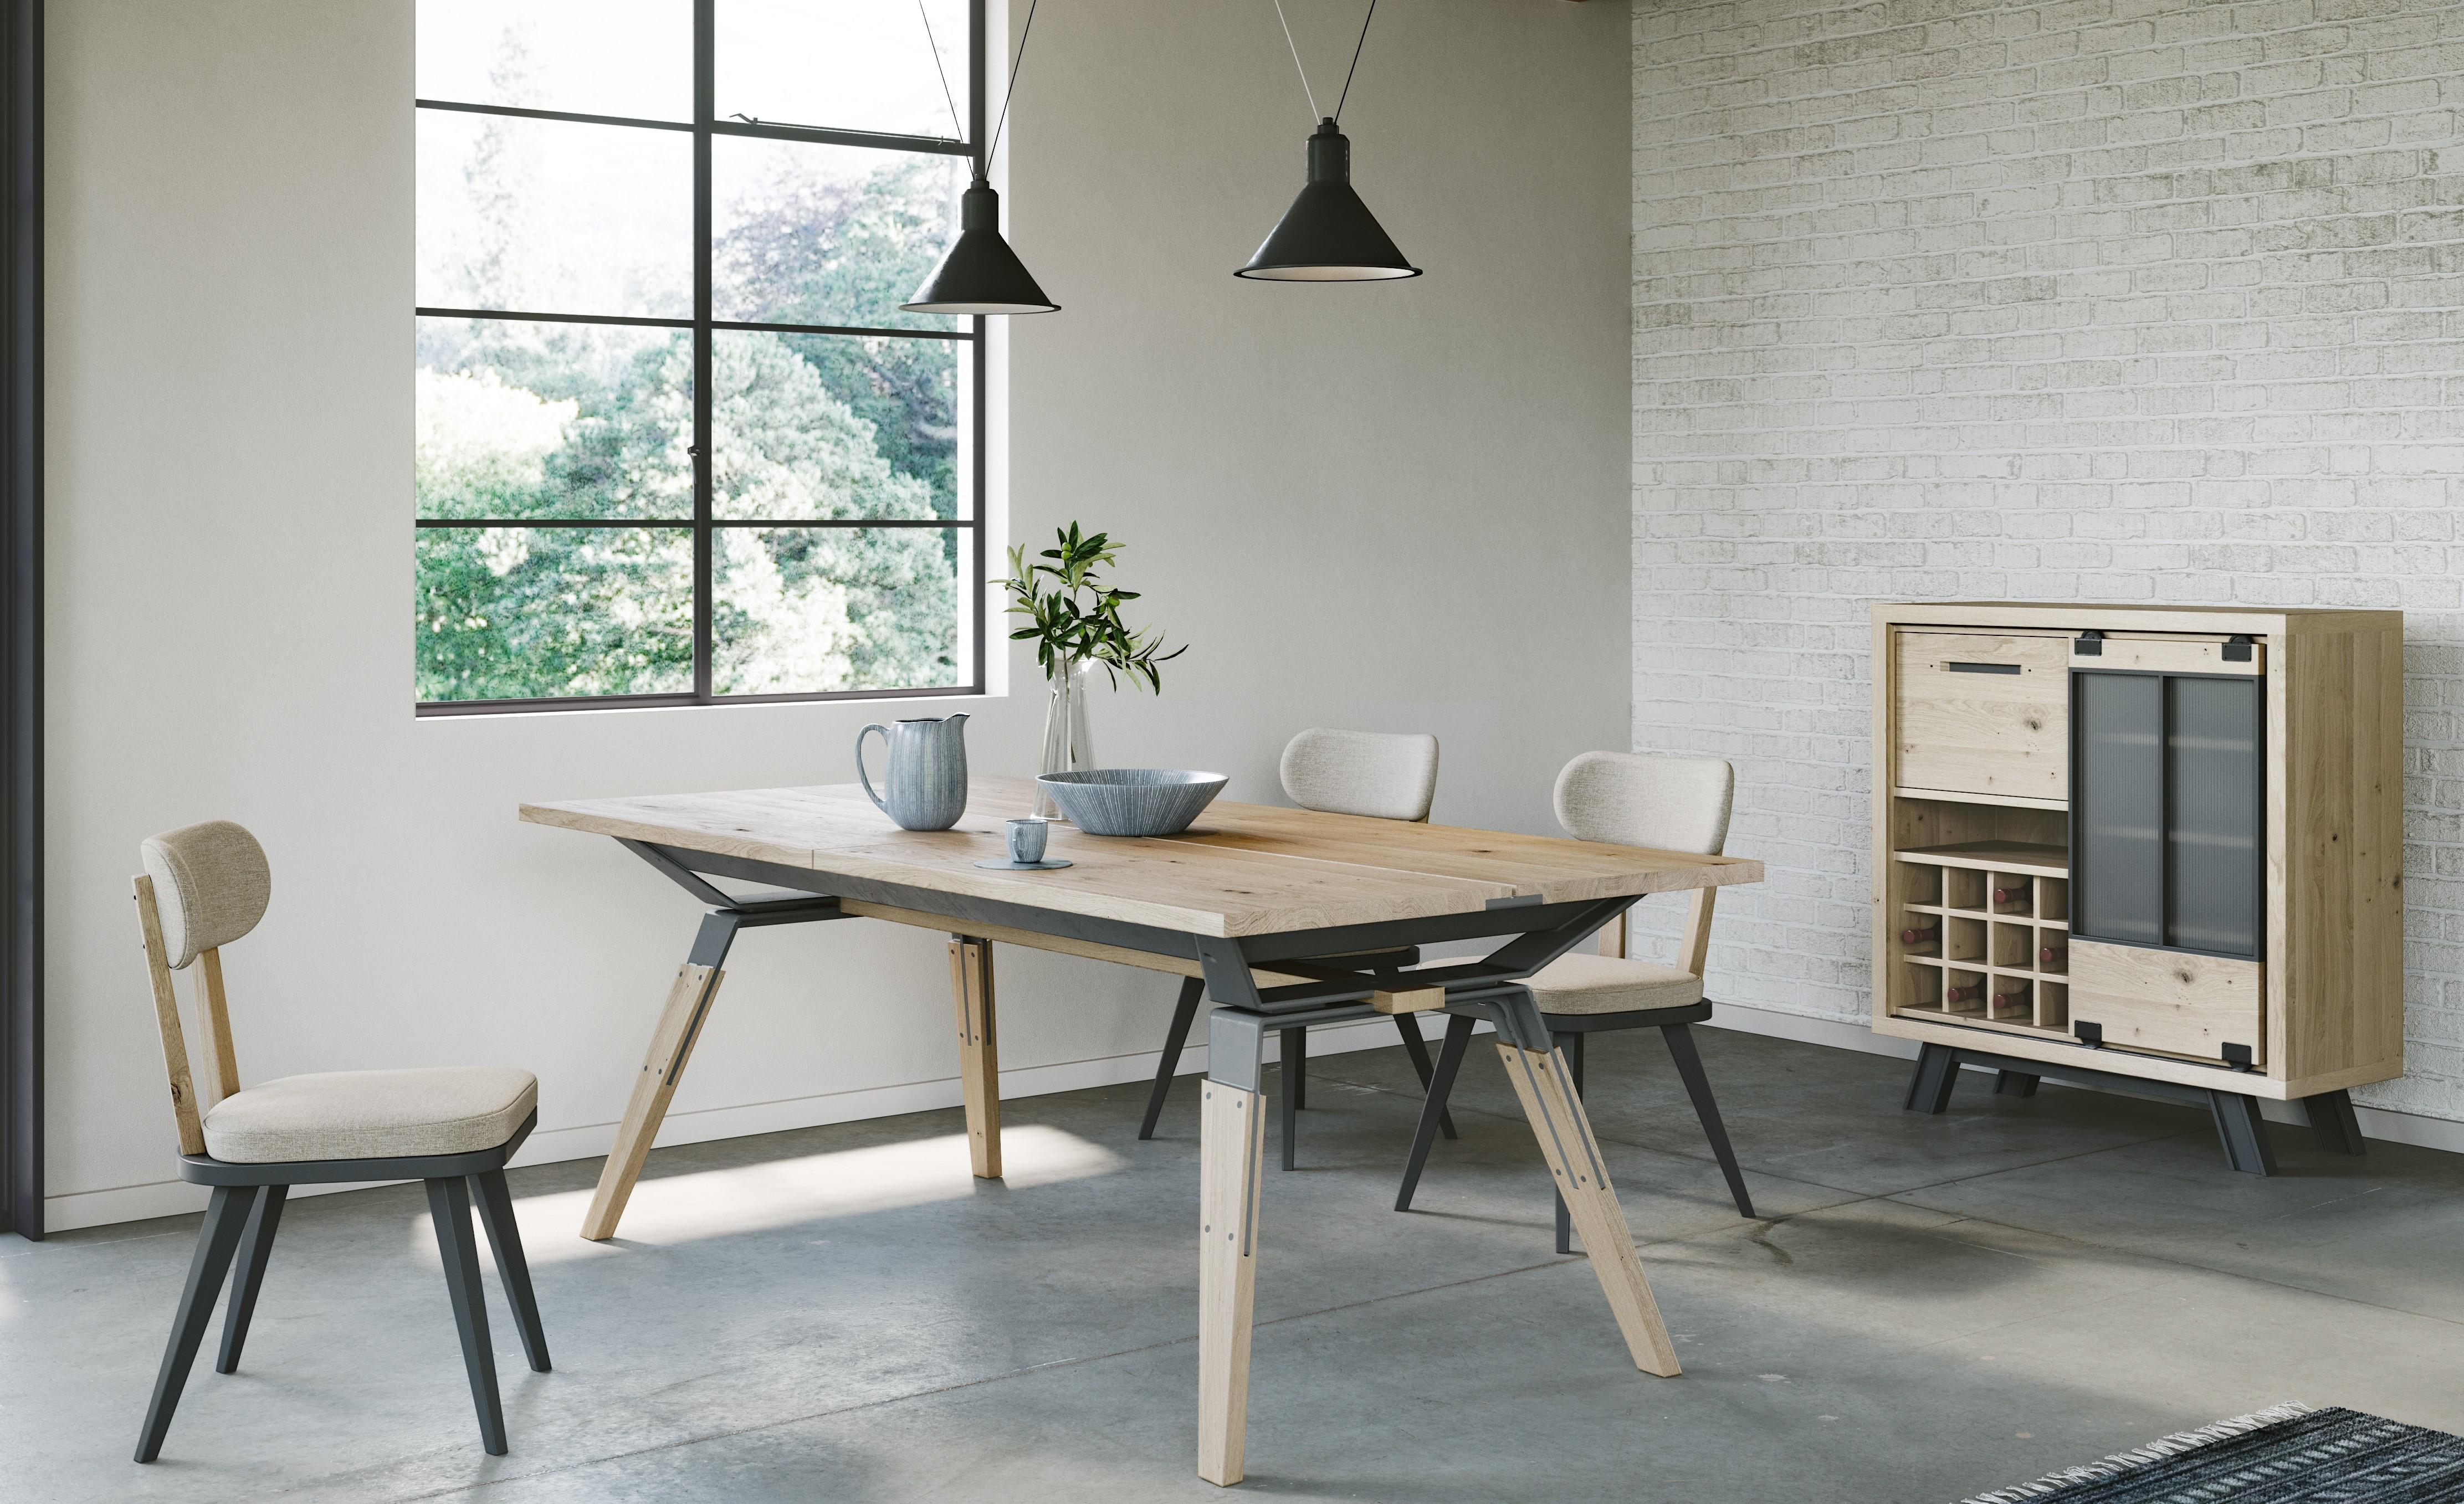 The ST James collection incorporates glass and metel details in its furniture pieces that give them a sober and industrial look without compromising their versatility. Measures: 140cm.

Produced by Cacio with more than 70 years of know how, this